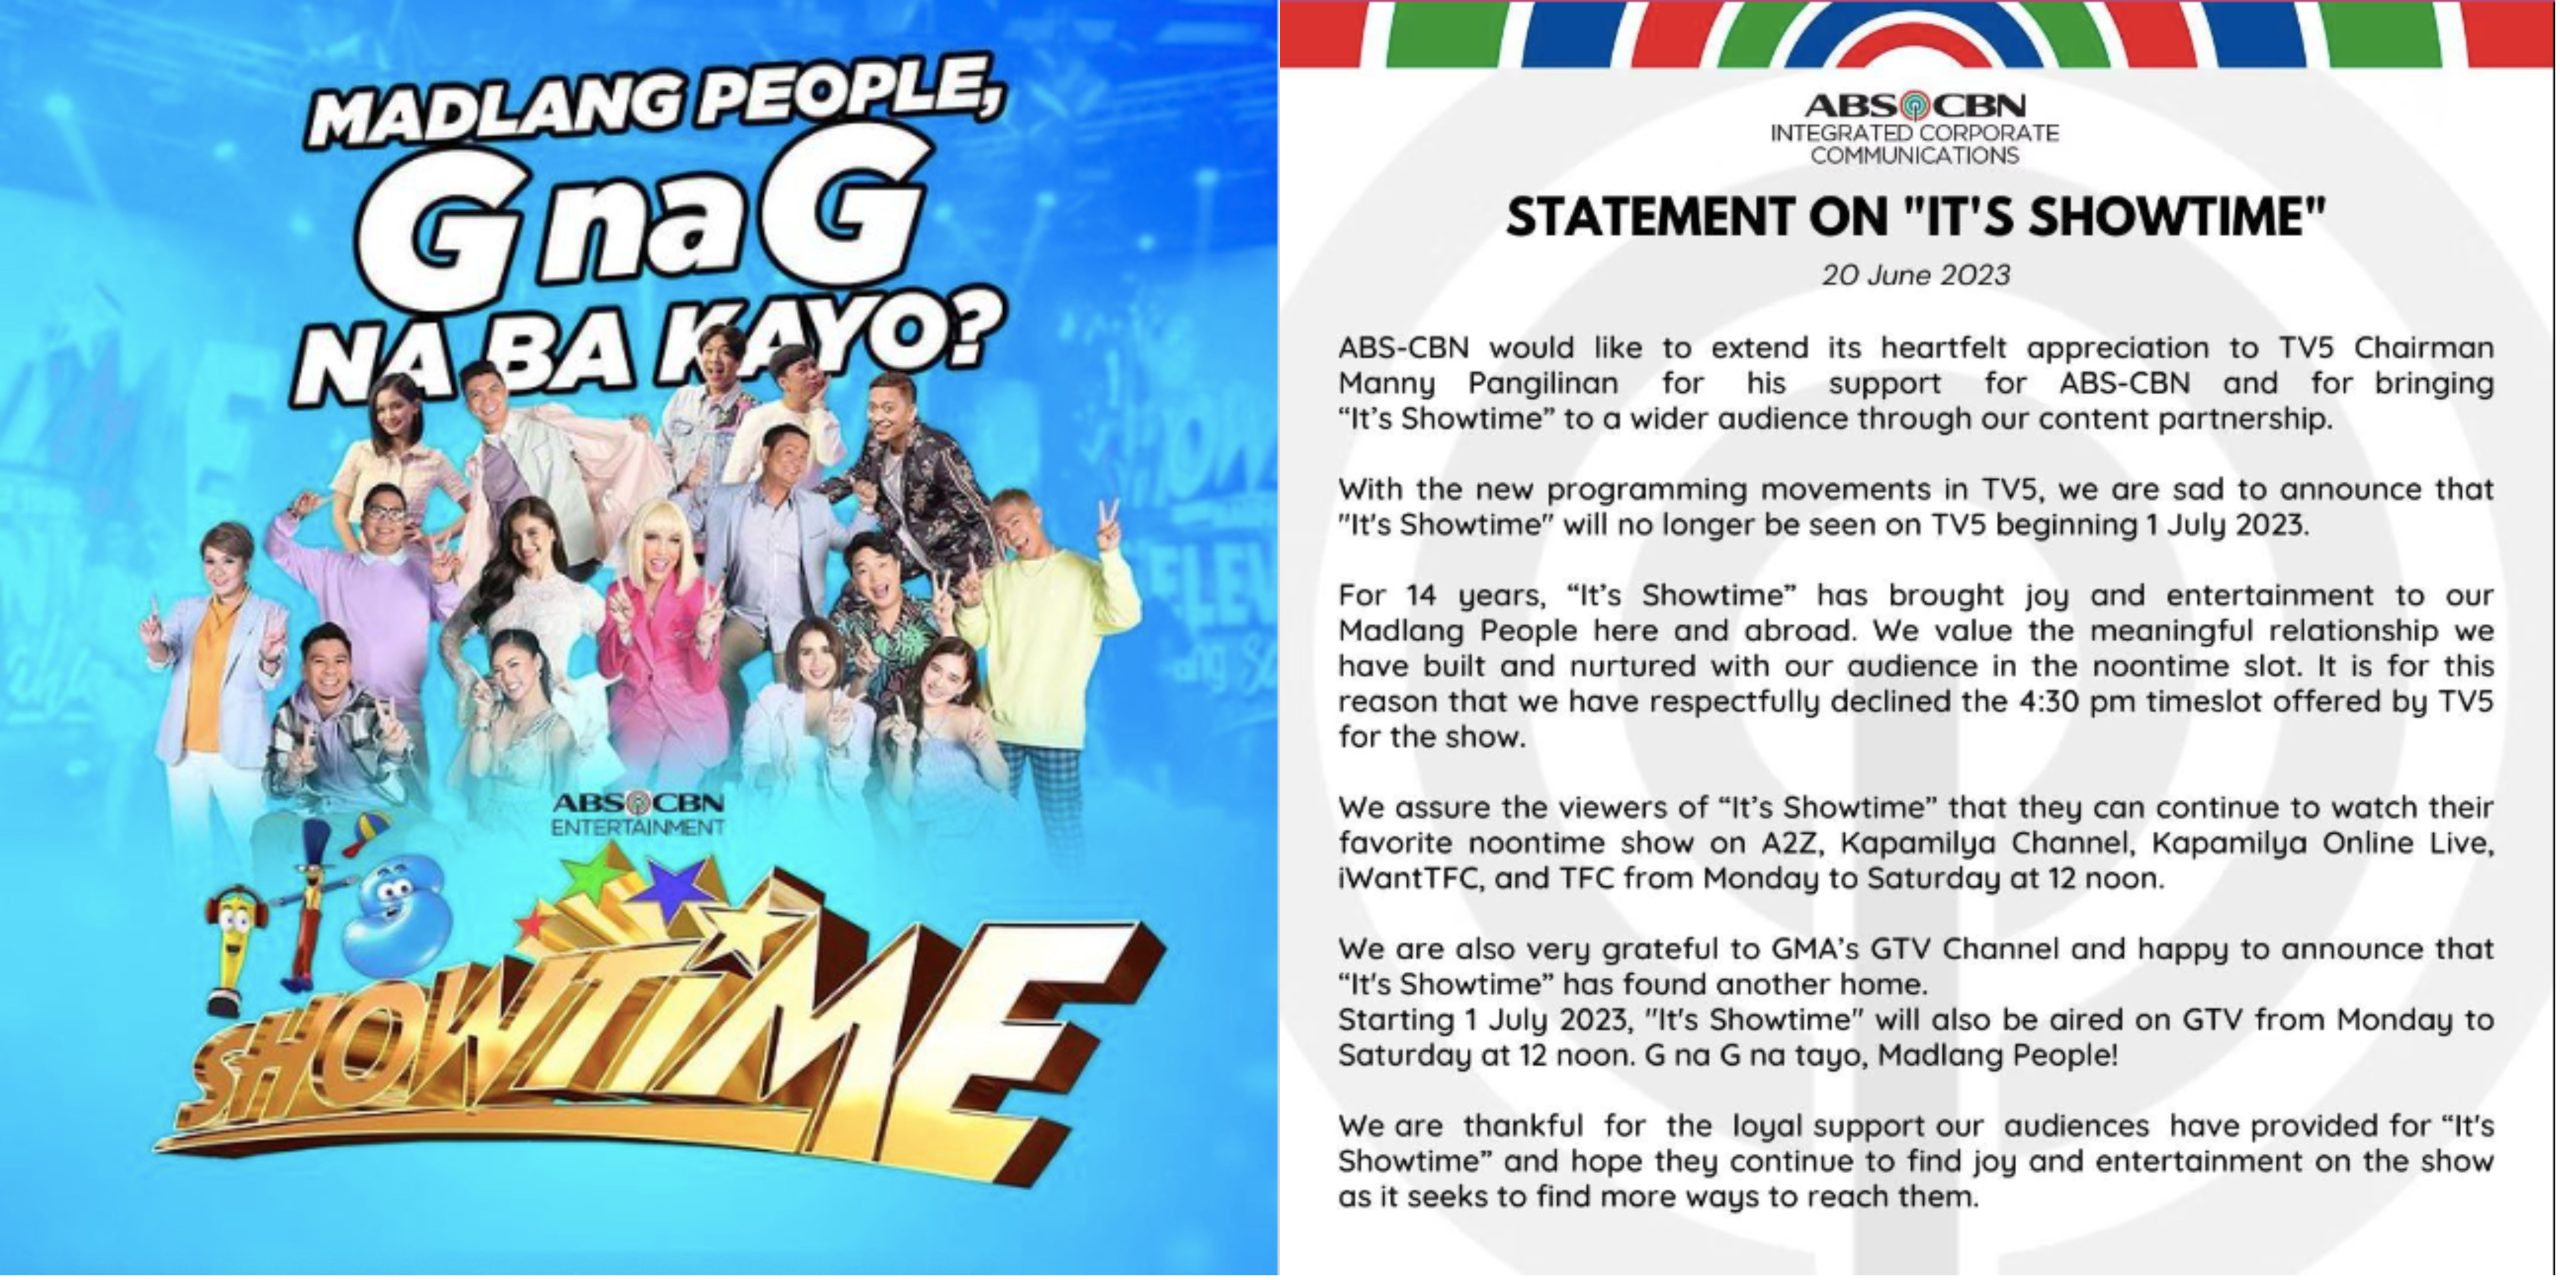 "It's Showtime" Bids Farewell to TV5, Moves to GMA Network's GTV The